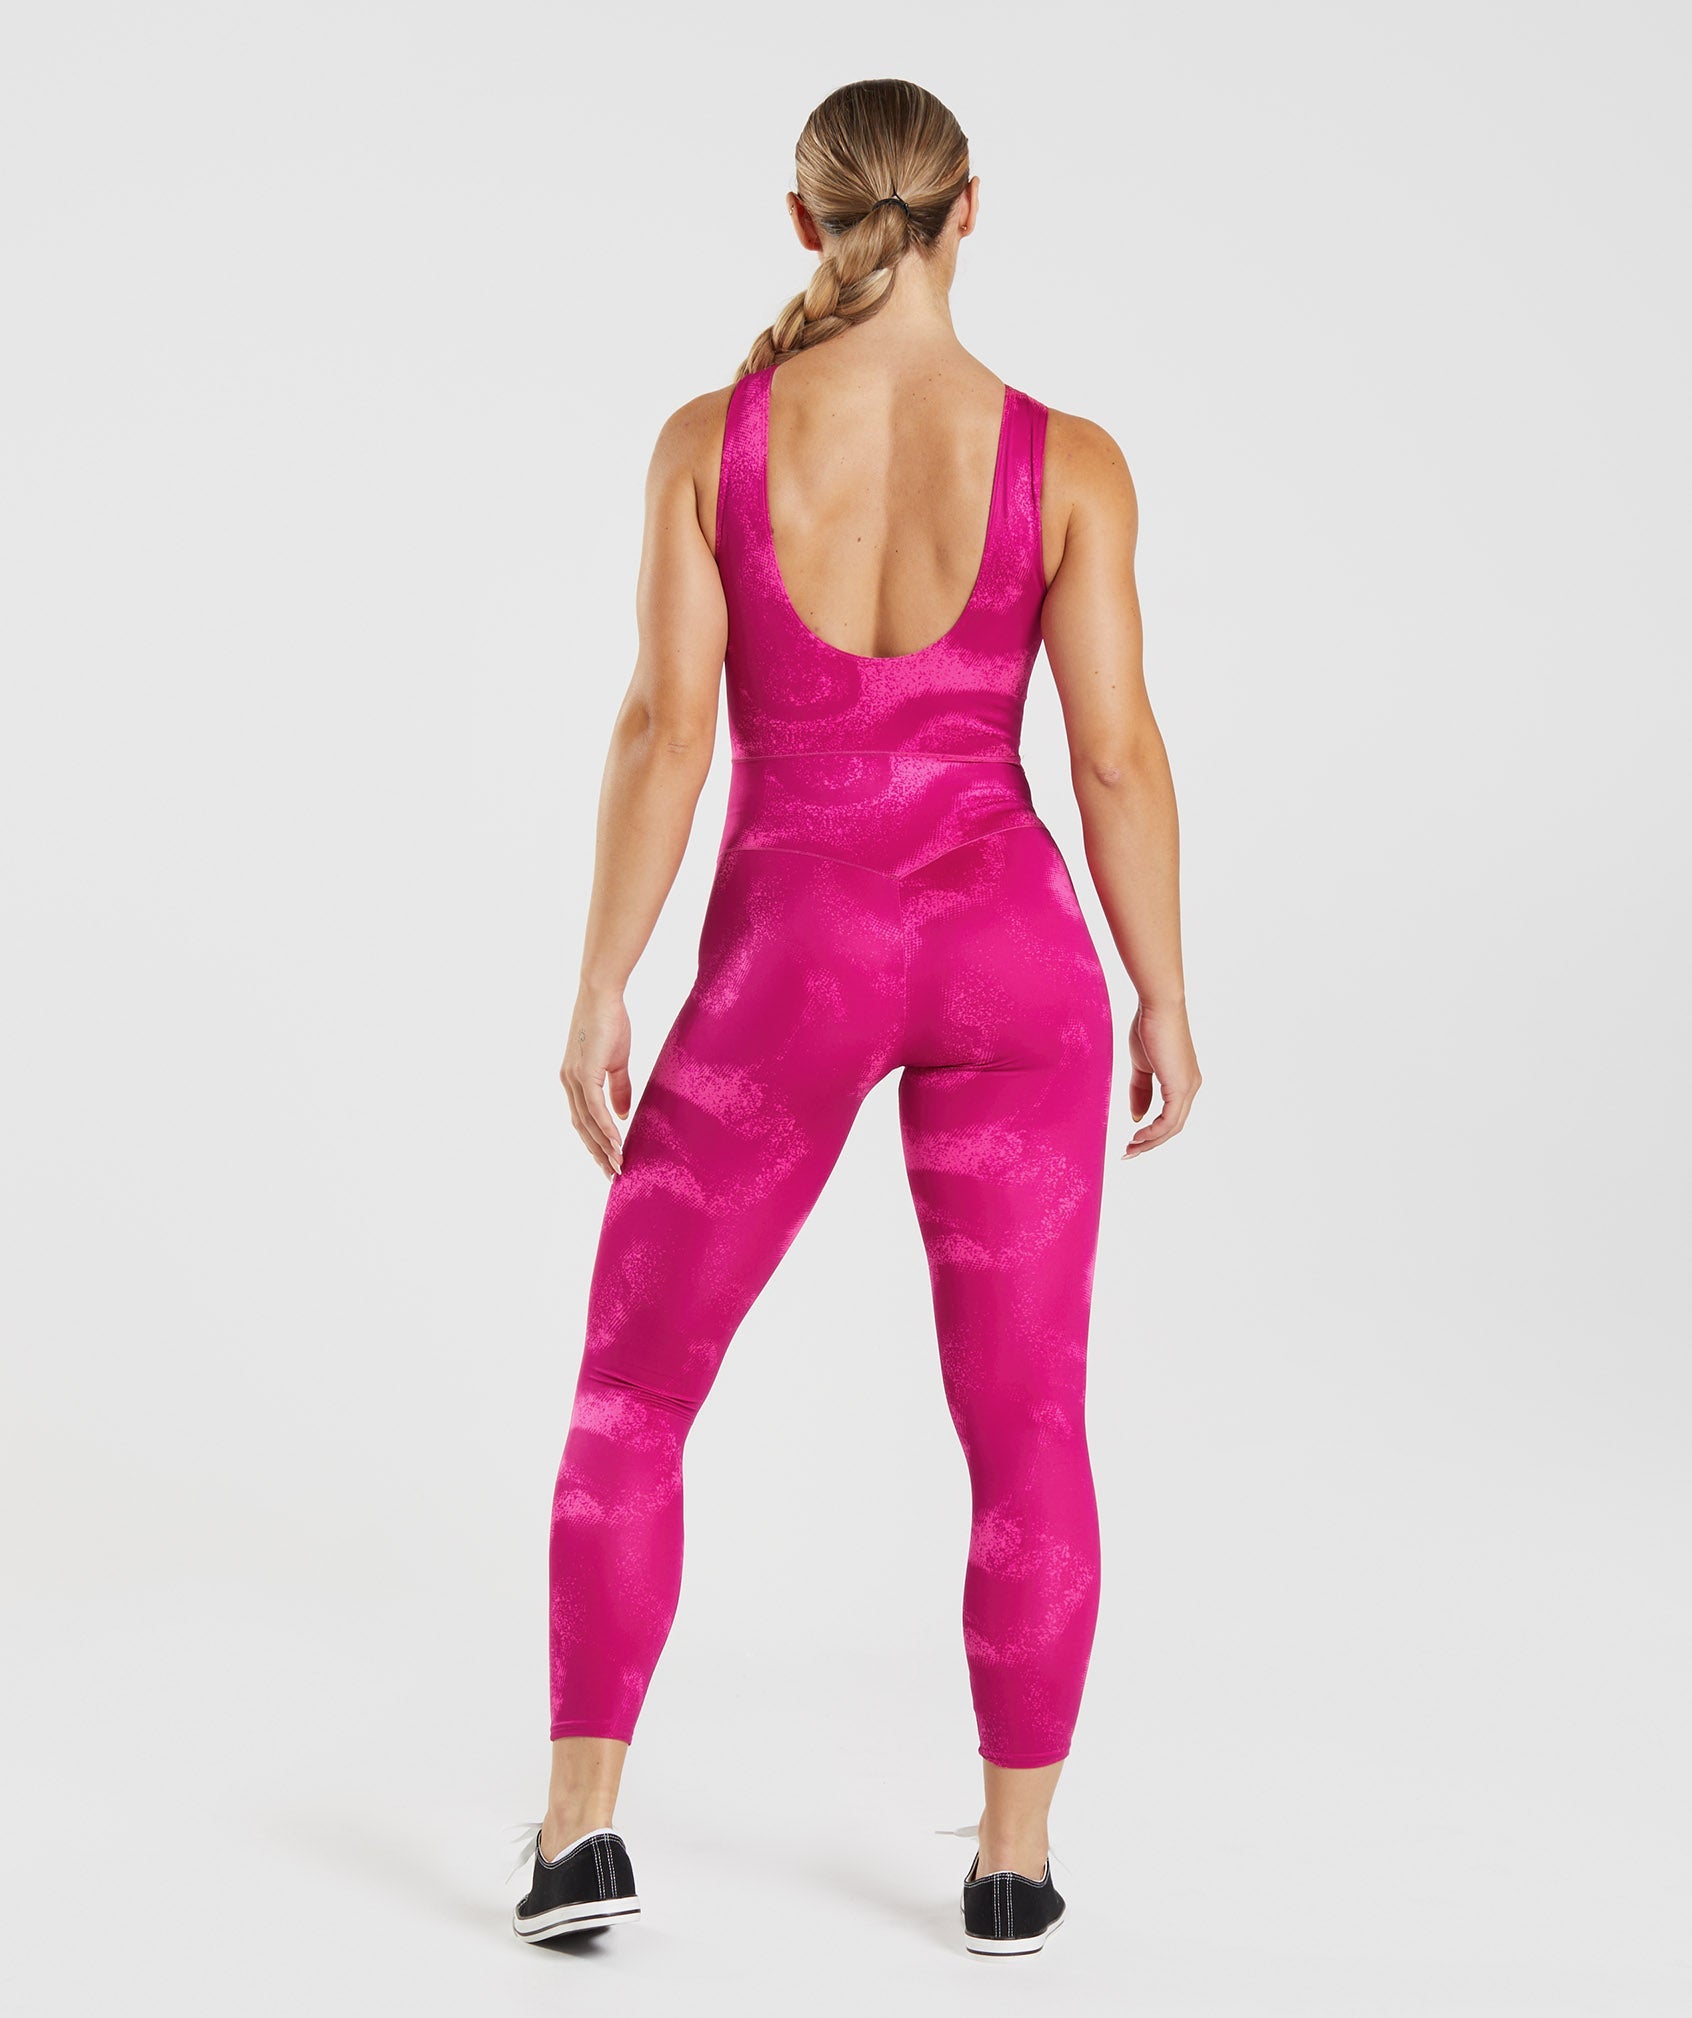 GS Power Full Length All In One in Magenta Pink Print - view 2